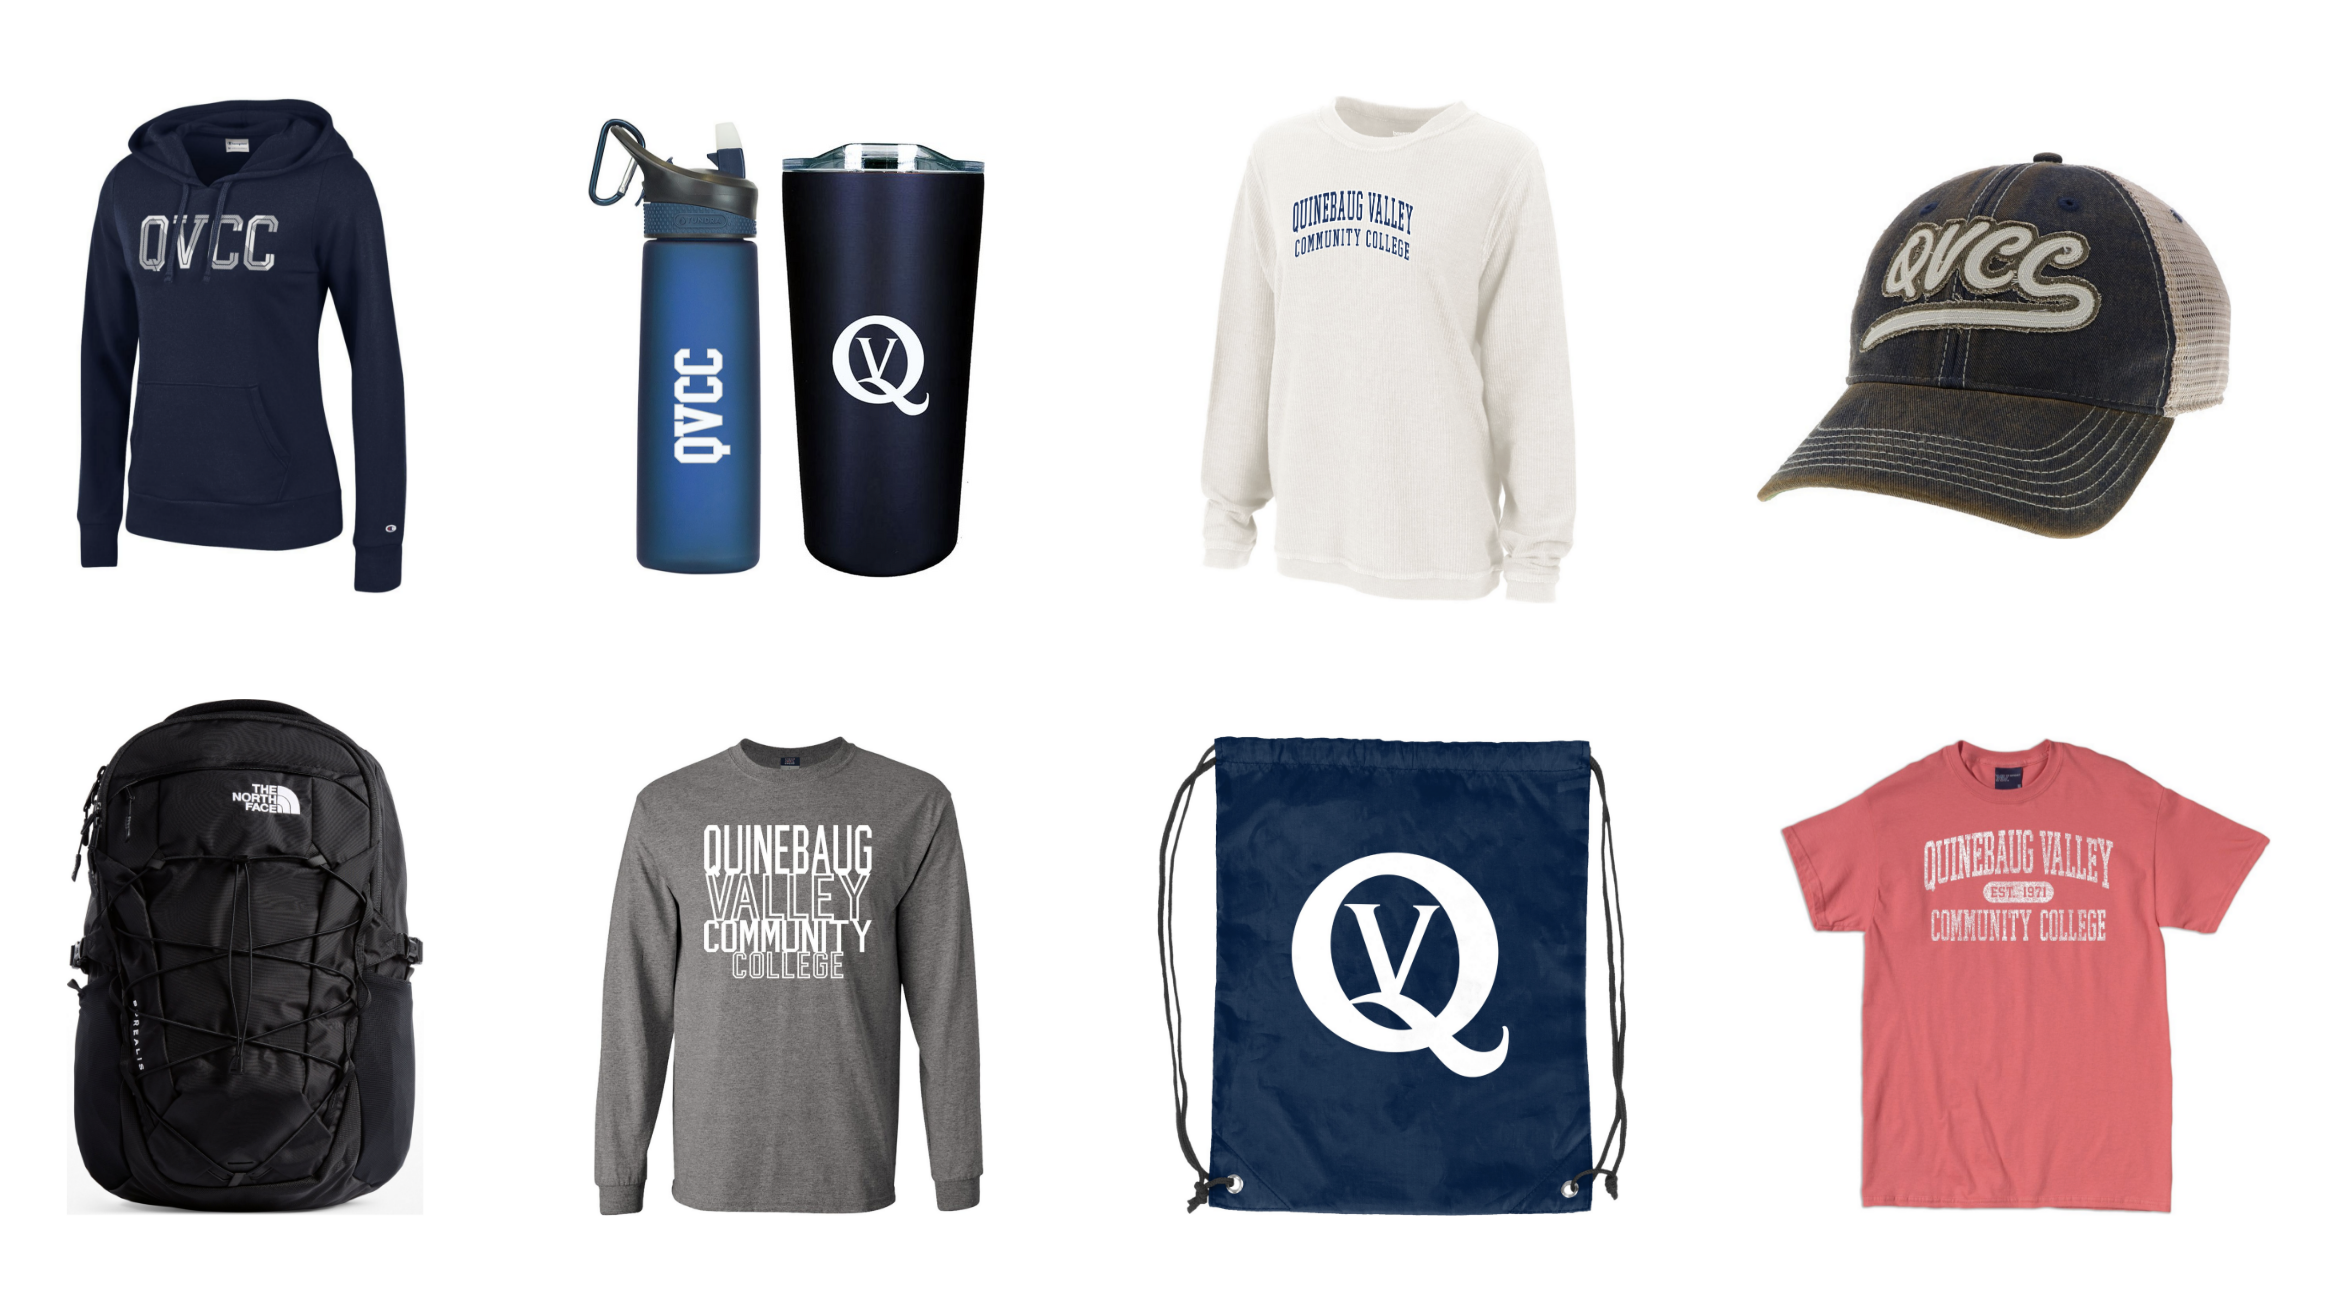 QVCC bookstore, campus store, Follett, textbooks, course materials, books, clothing, apparel, t-shirts, tshirts, sweatshirts, shop, store, fan gear